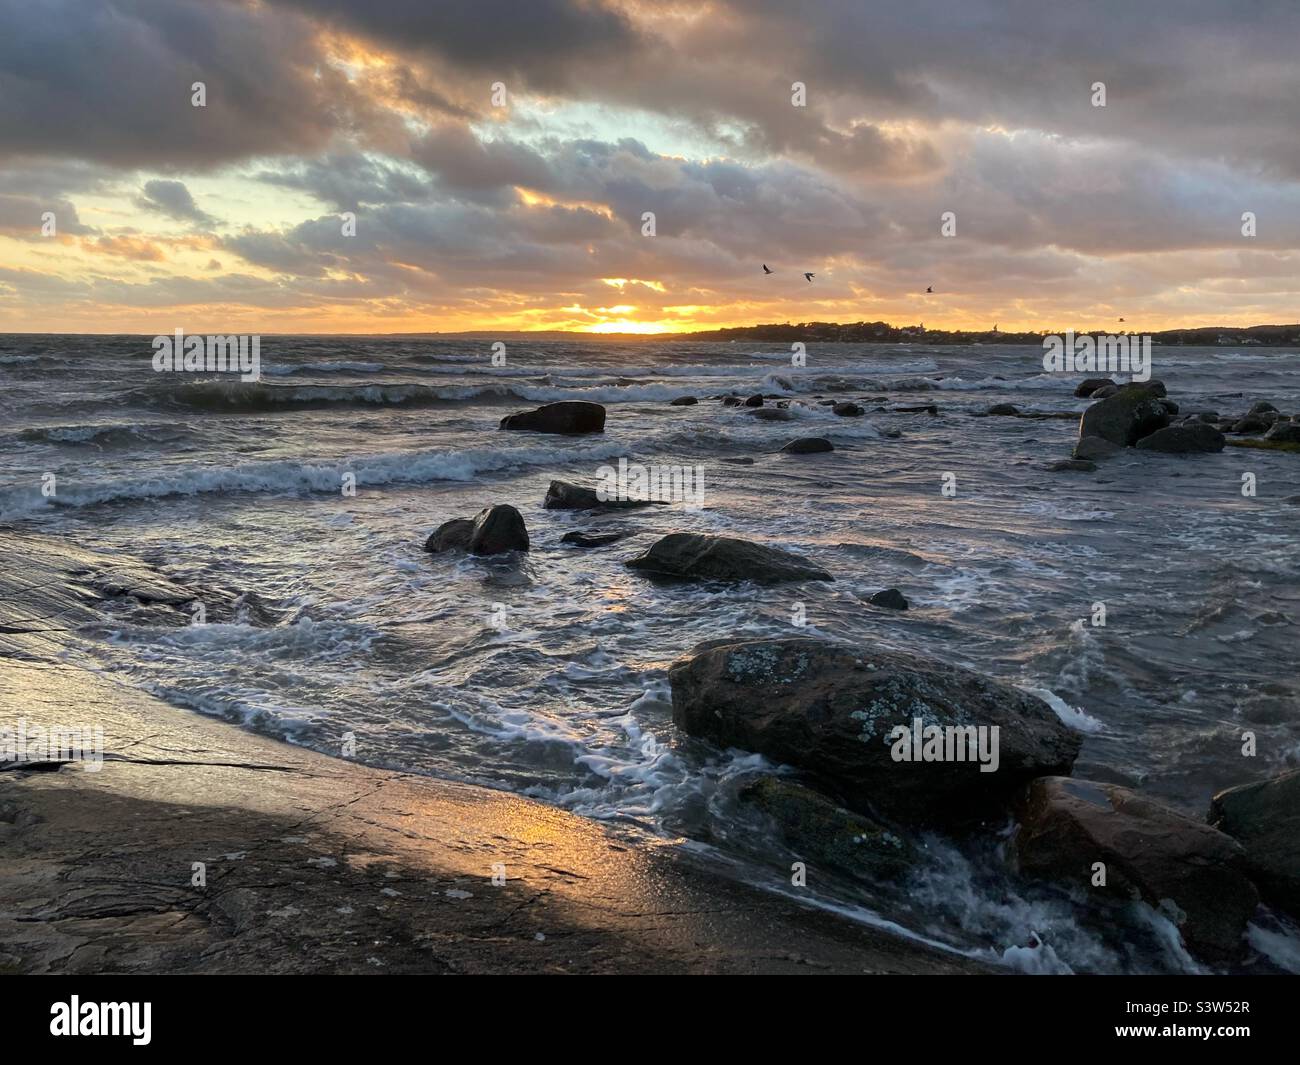 A Sunset at The baltic sea on the Swedish West Coast during a summer Storm Stock Photo